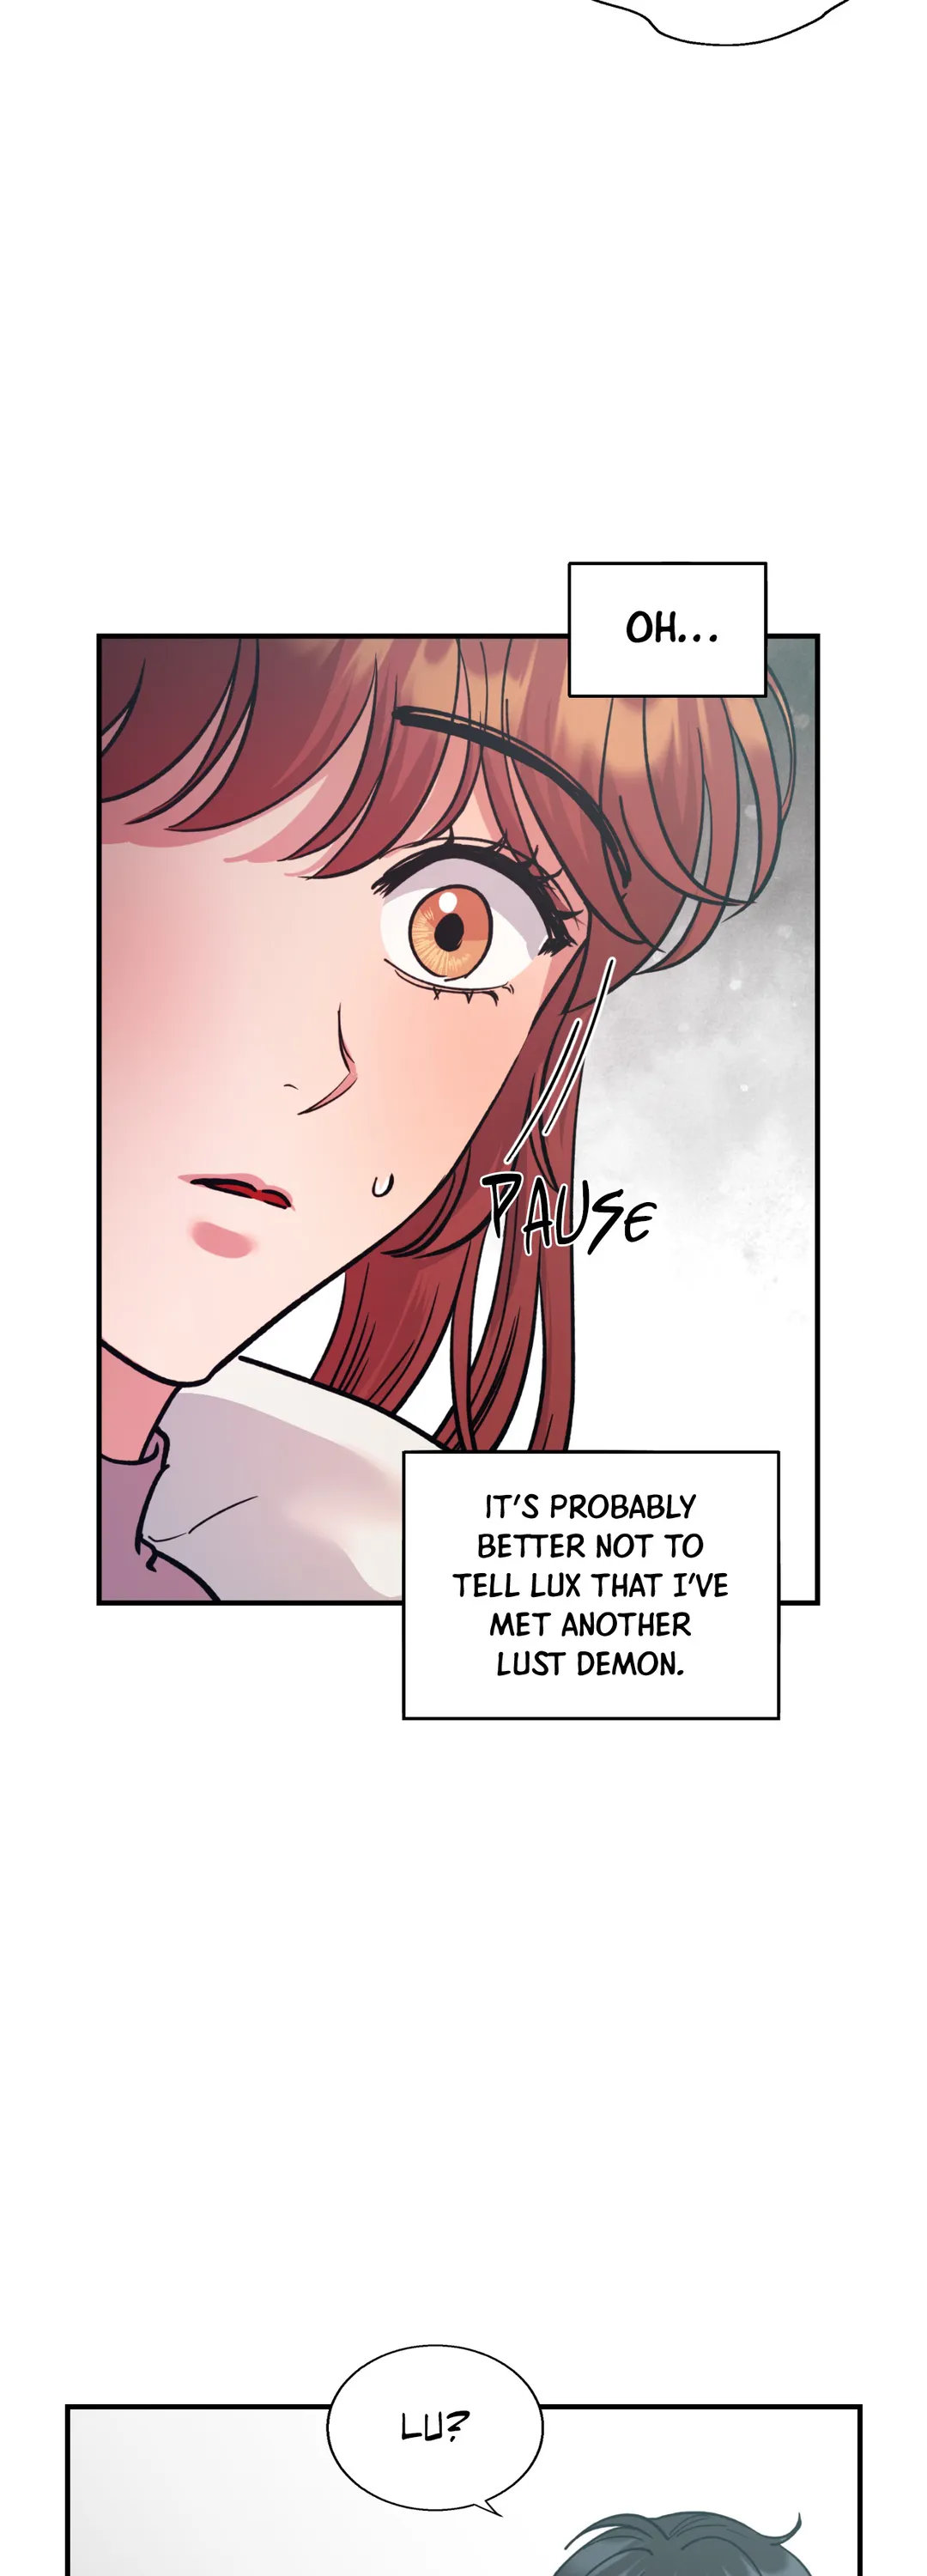 Hana’s Demons of Lust - Chapter 53 Page 5